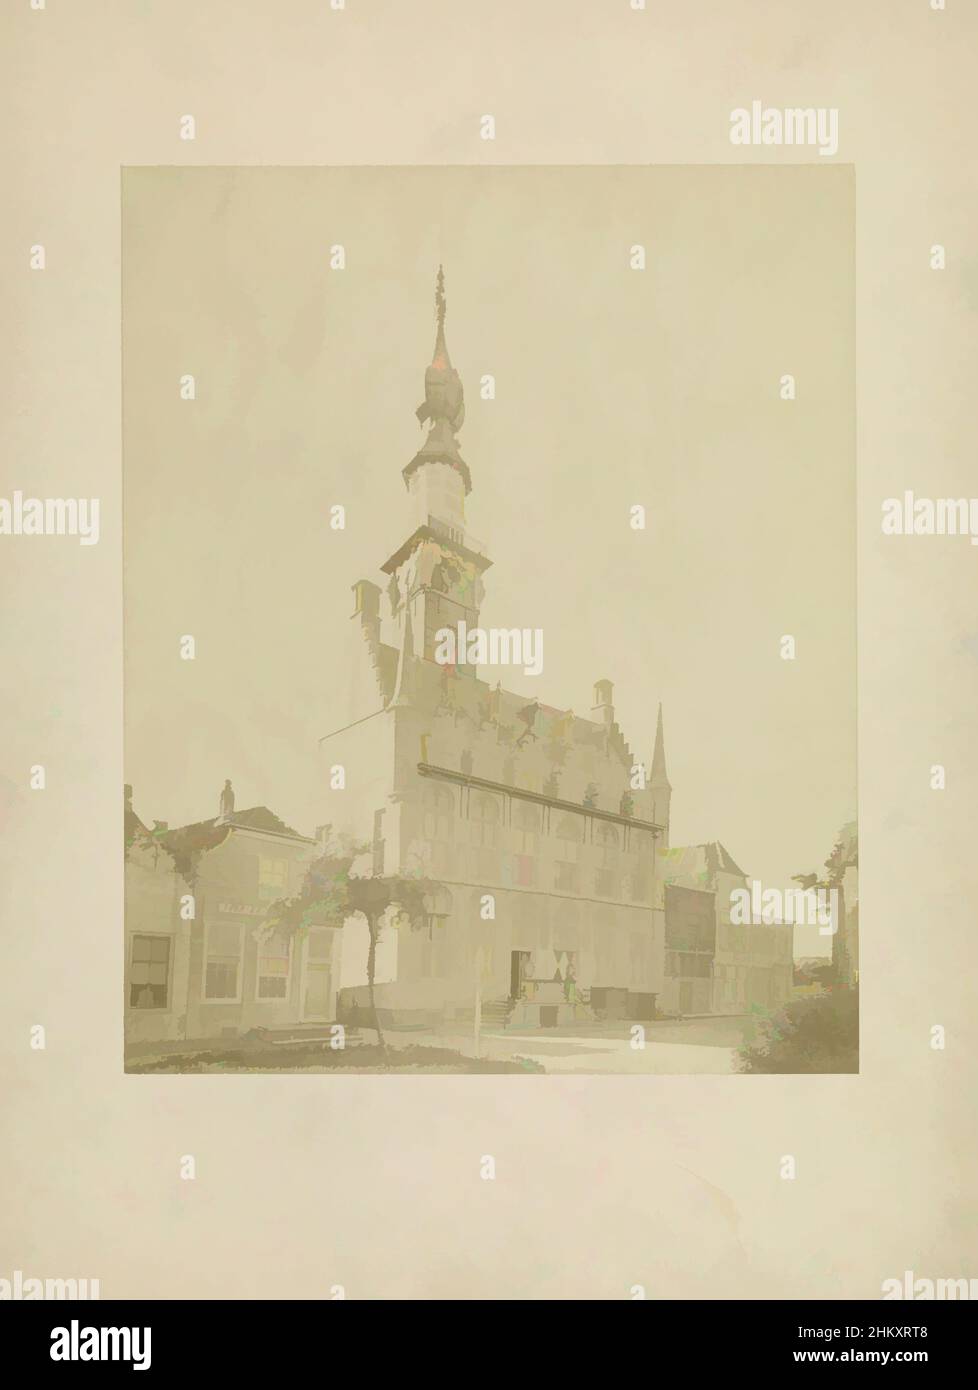 Art inspired by View of the town hall in Veere, Town hall in Veere (1474), Veere, c. 1875 - c. 1900, cardboard, albumen print, height 280 mm × width 221 mm, Classic works modernized by Artotop with a splash of modernity. Shapes, color and value, eye-catching visual impact on art. Emotions through freedom of artworks in a contemporary way. A timeless message pursuing a wildly creative new direction. Artists turning to the digital medium and creating the Artotop NFT Stock Photo